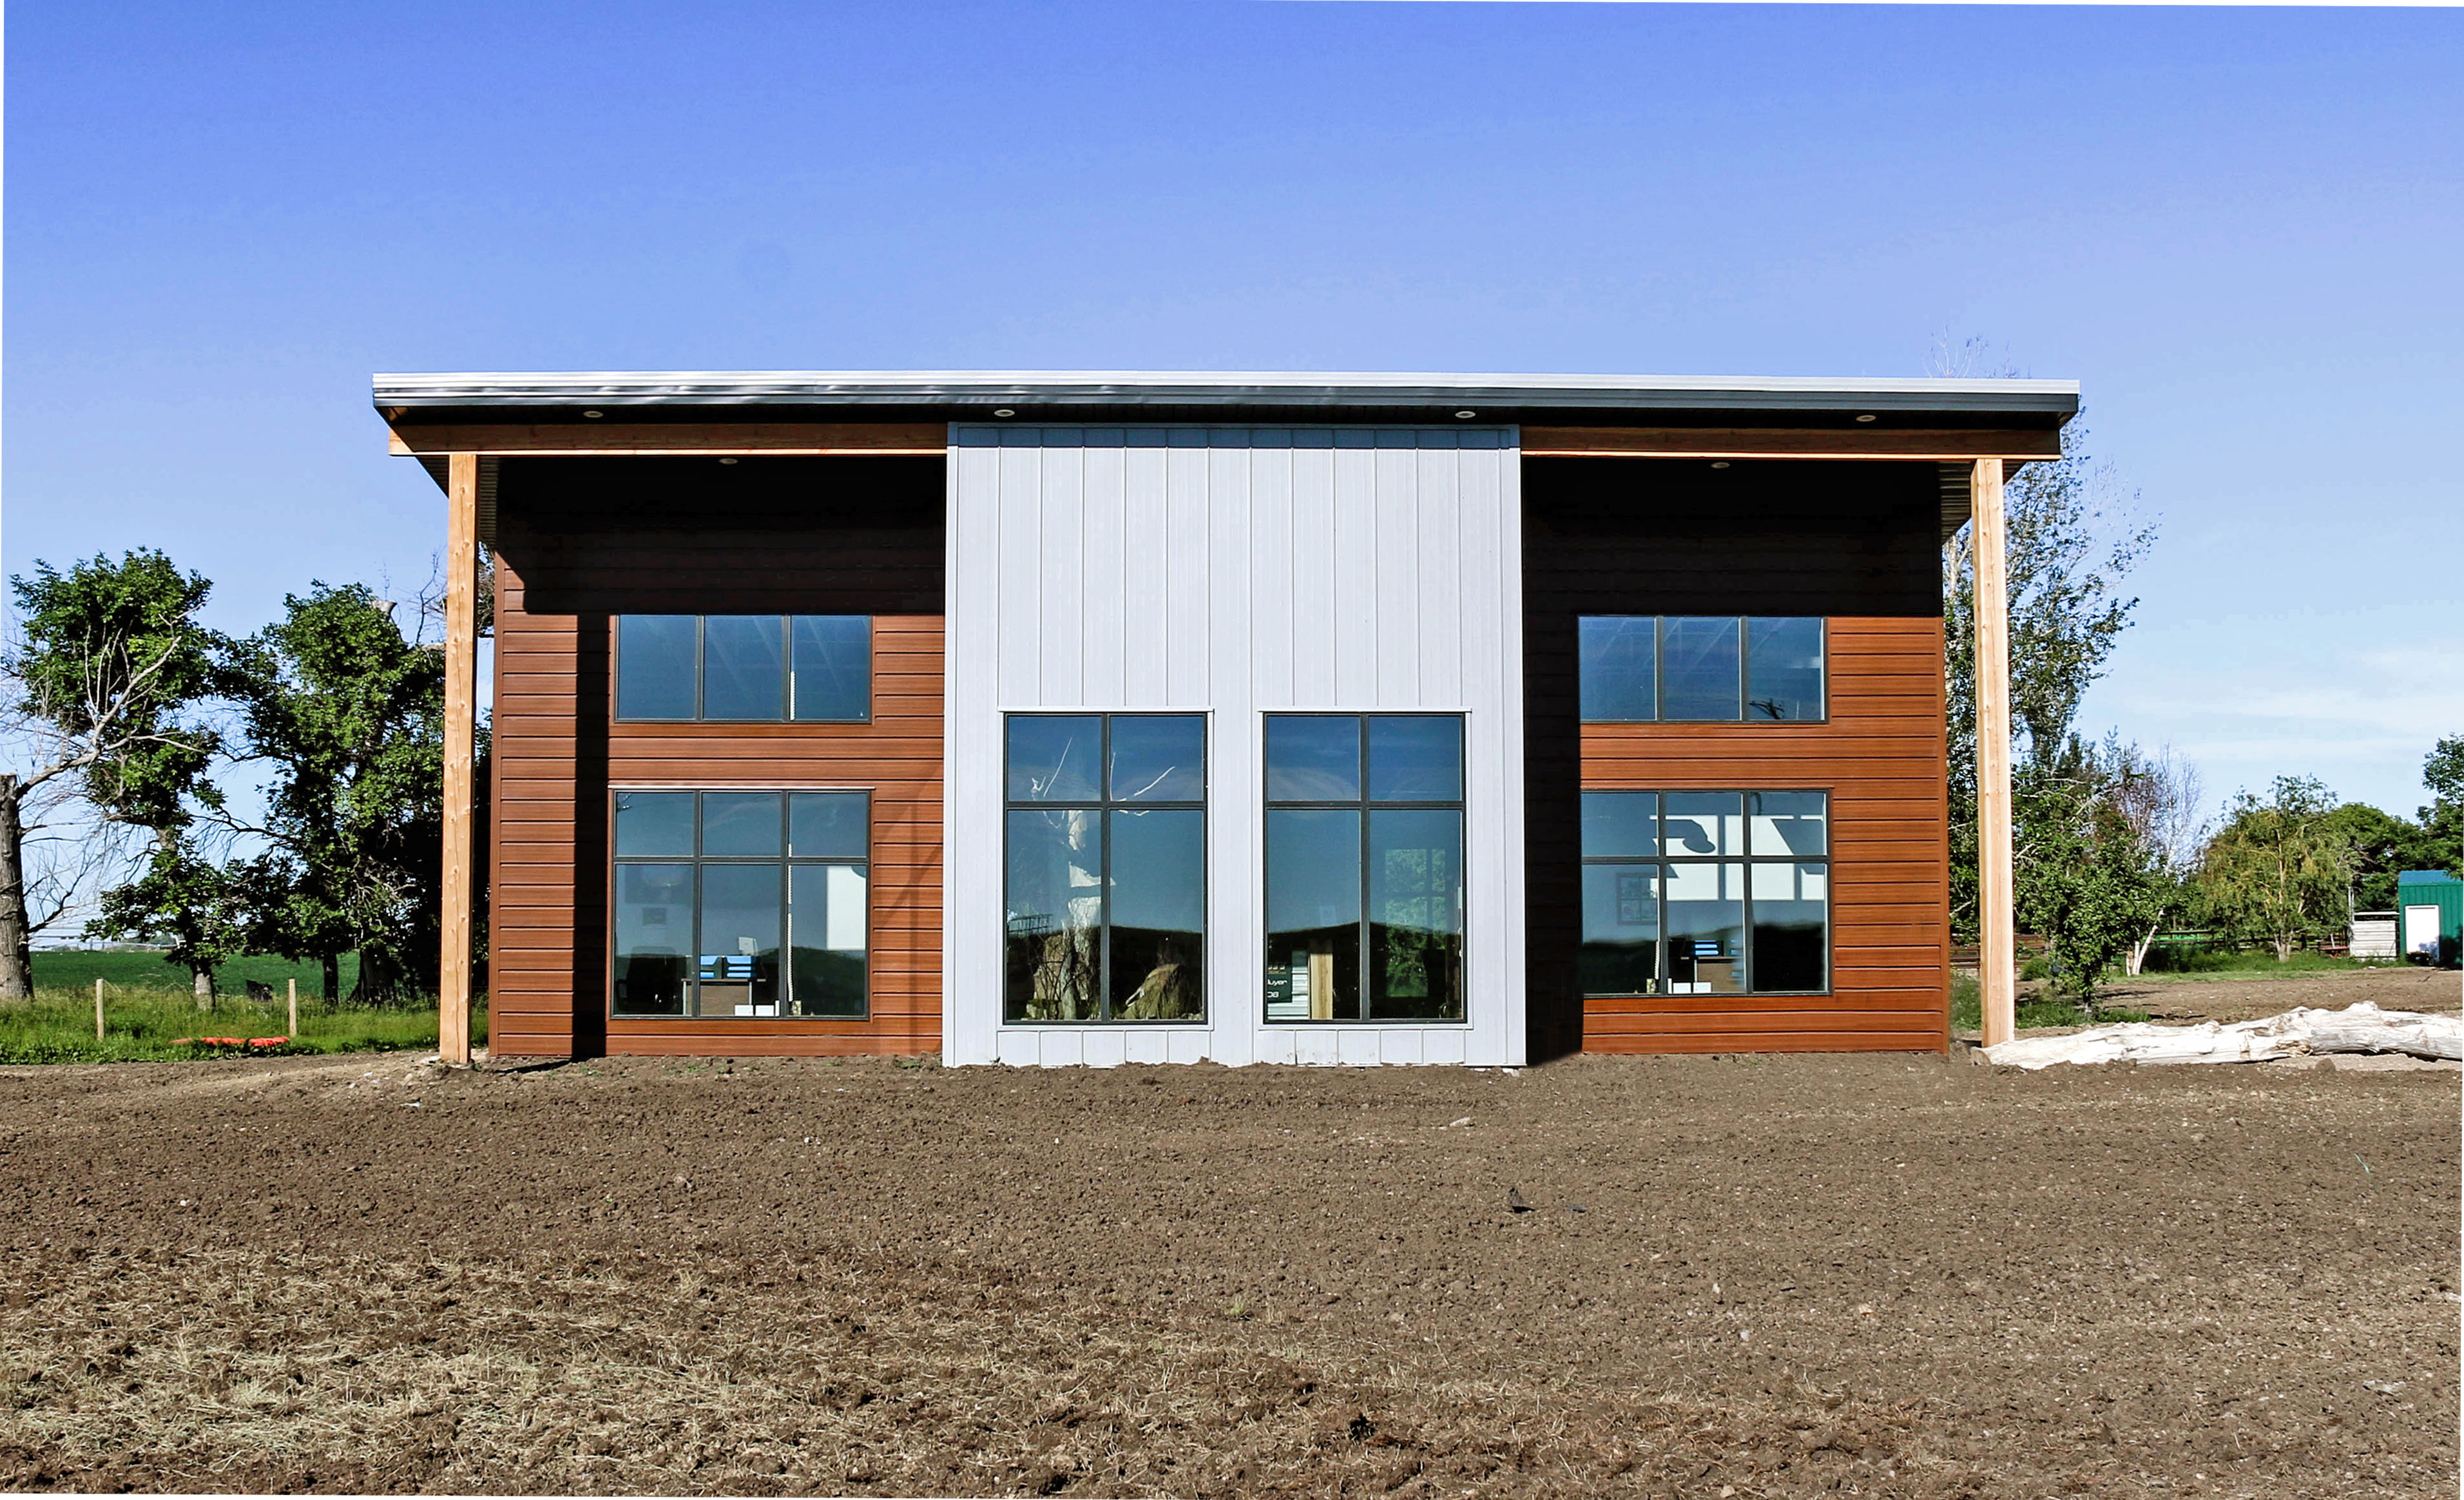 Commercial Office with Espresso Woodgrain FormaPlank and Regent Grey FormaLoc Siding